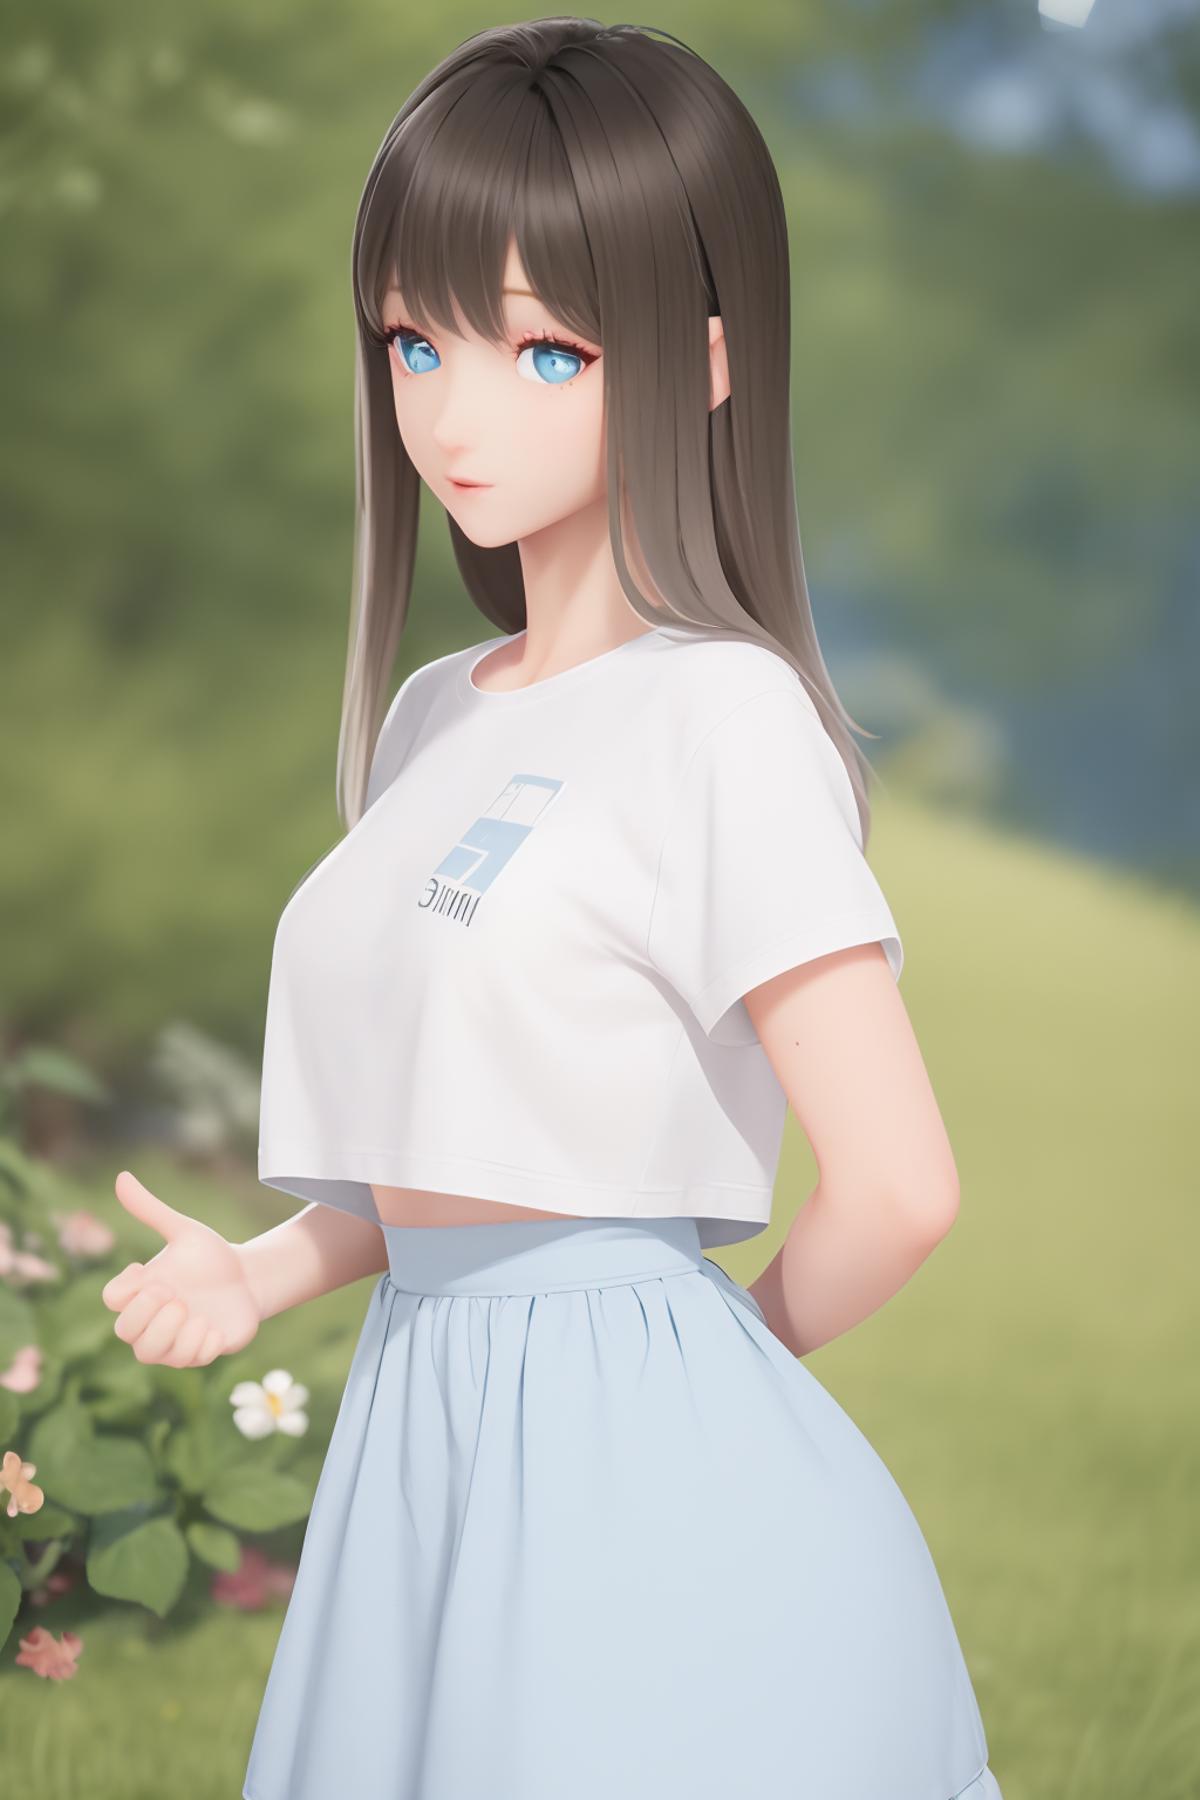 AI model image by Qiuse